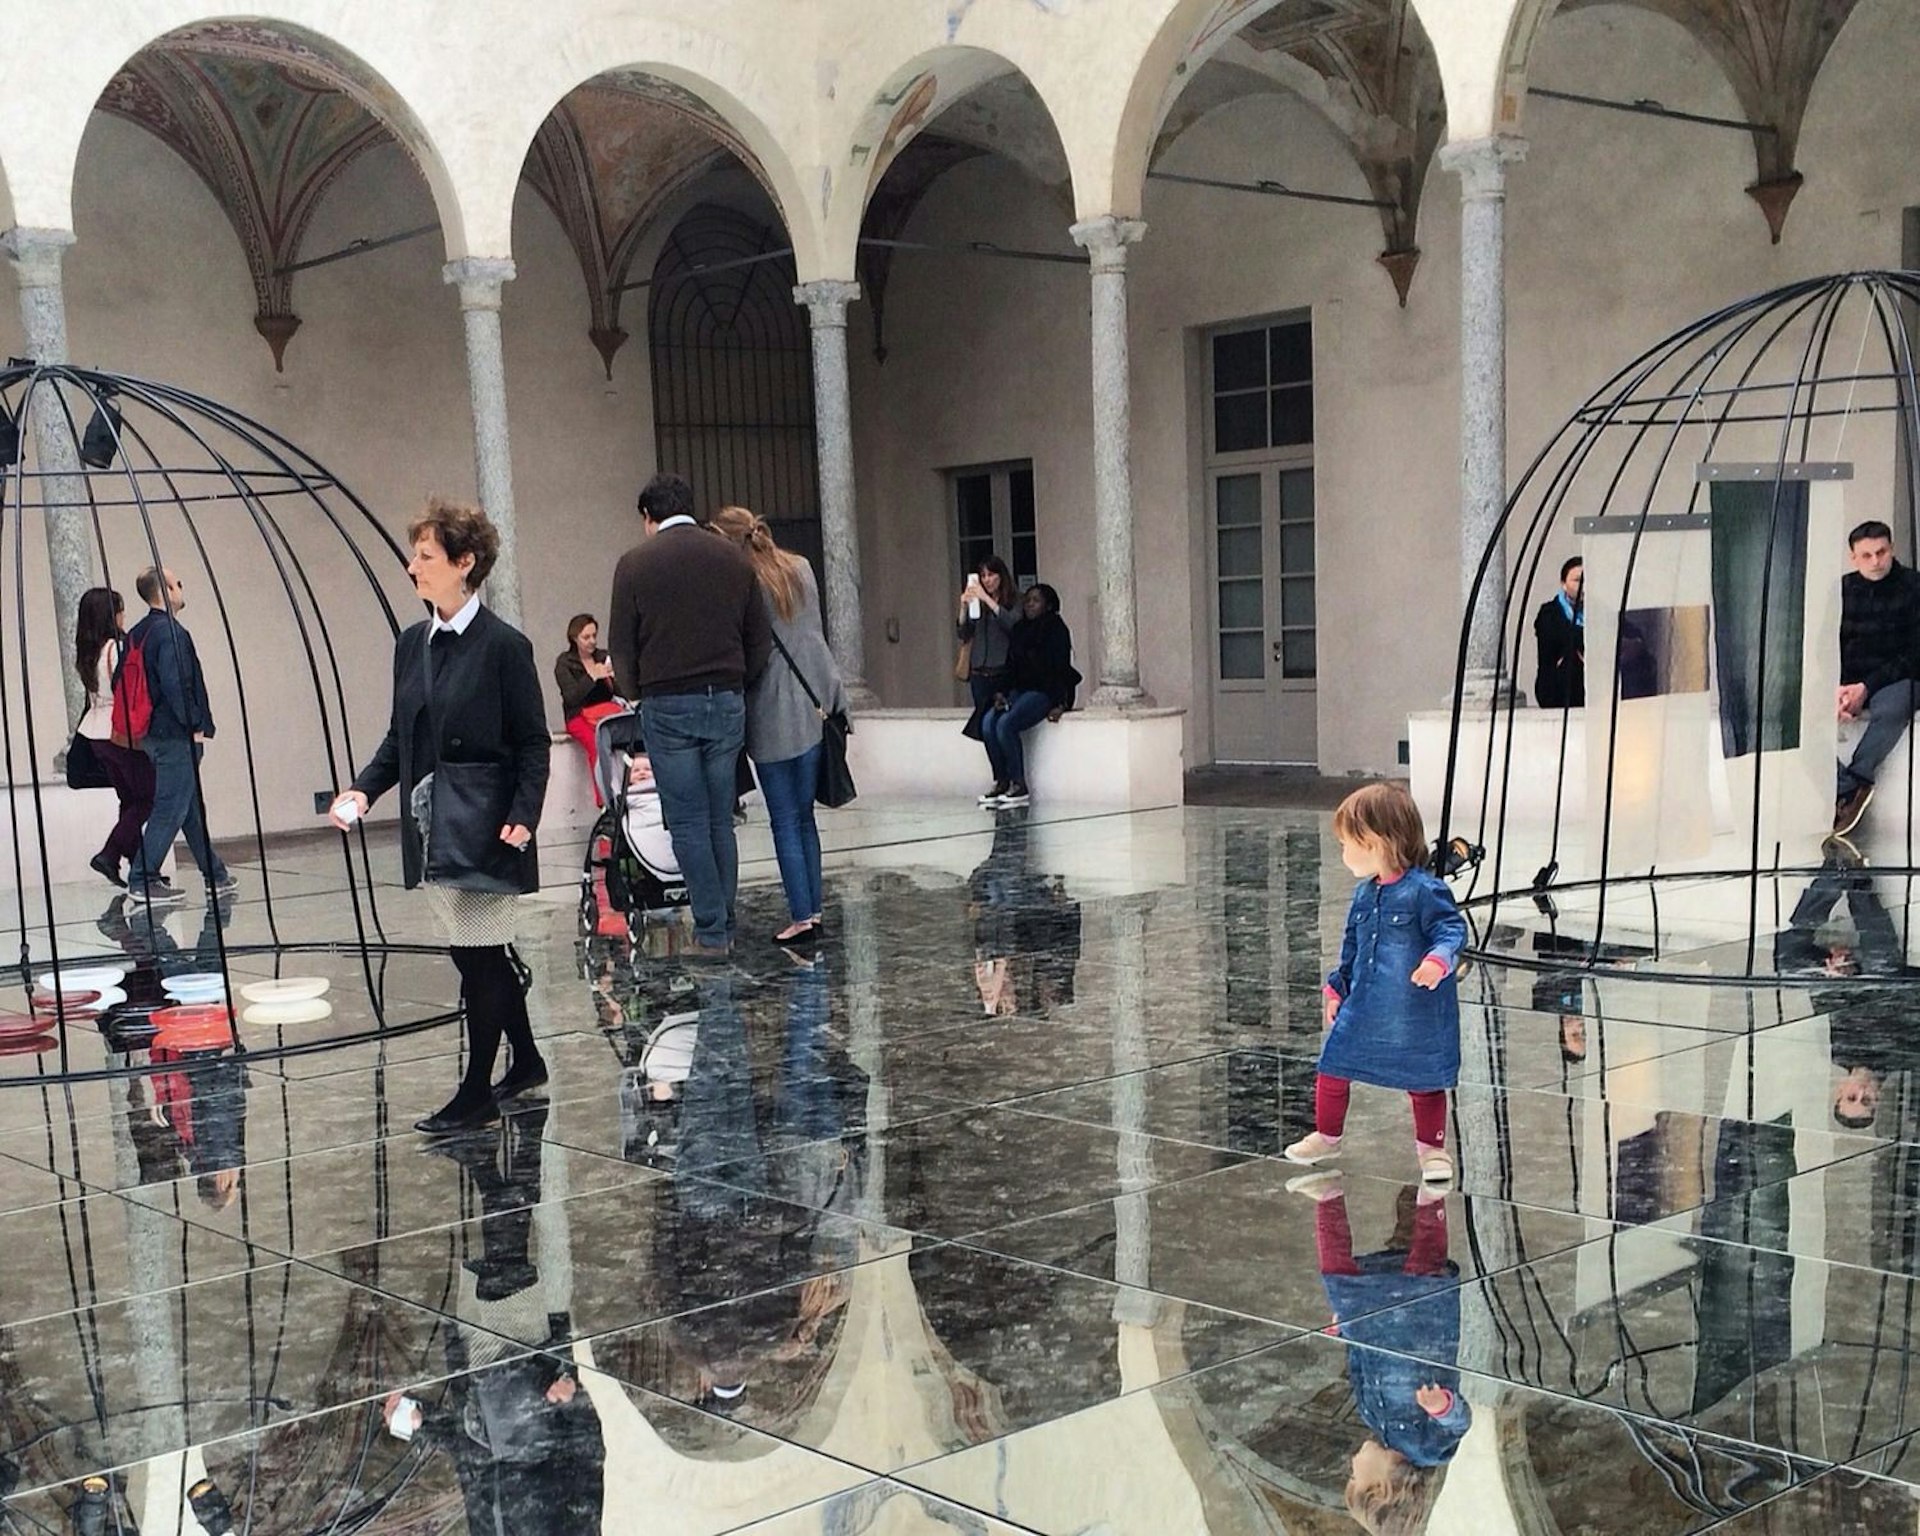 Modern art and onlookers at Fuorisalone design festival